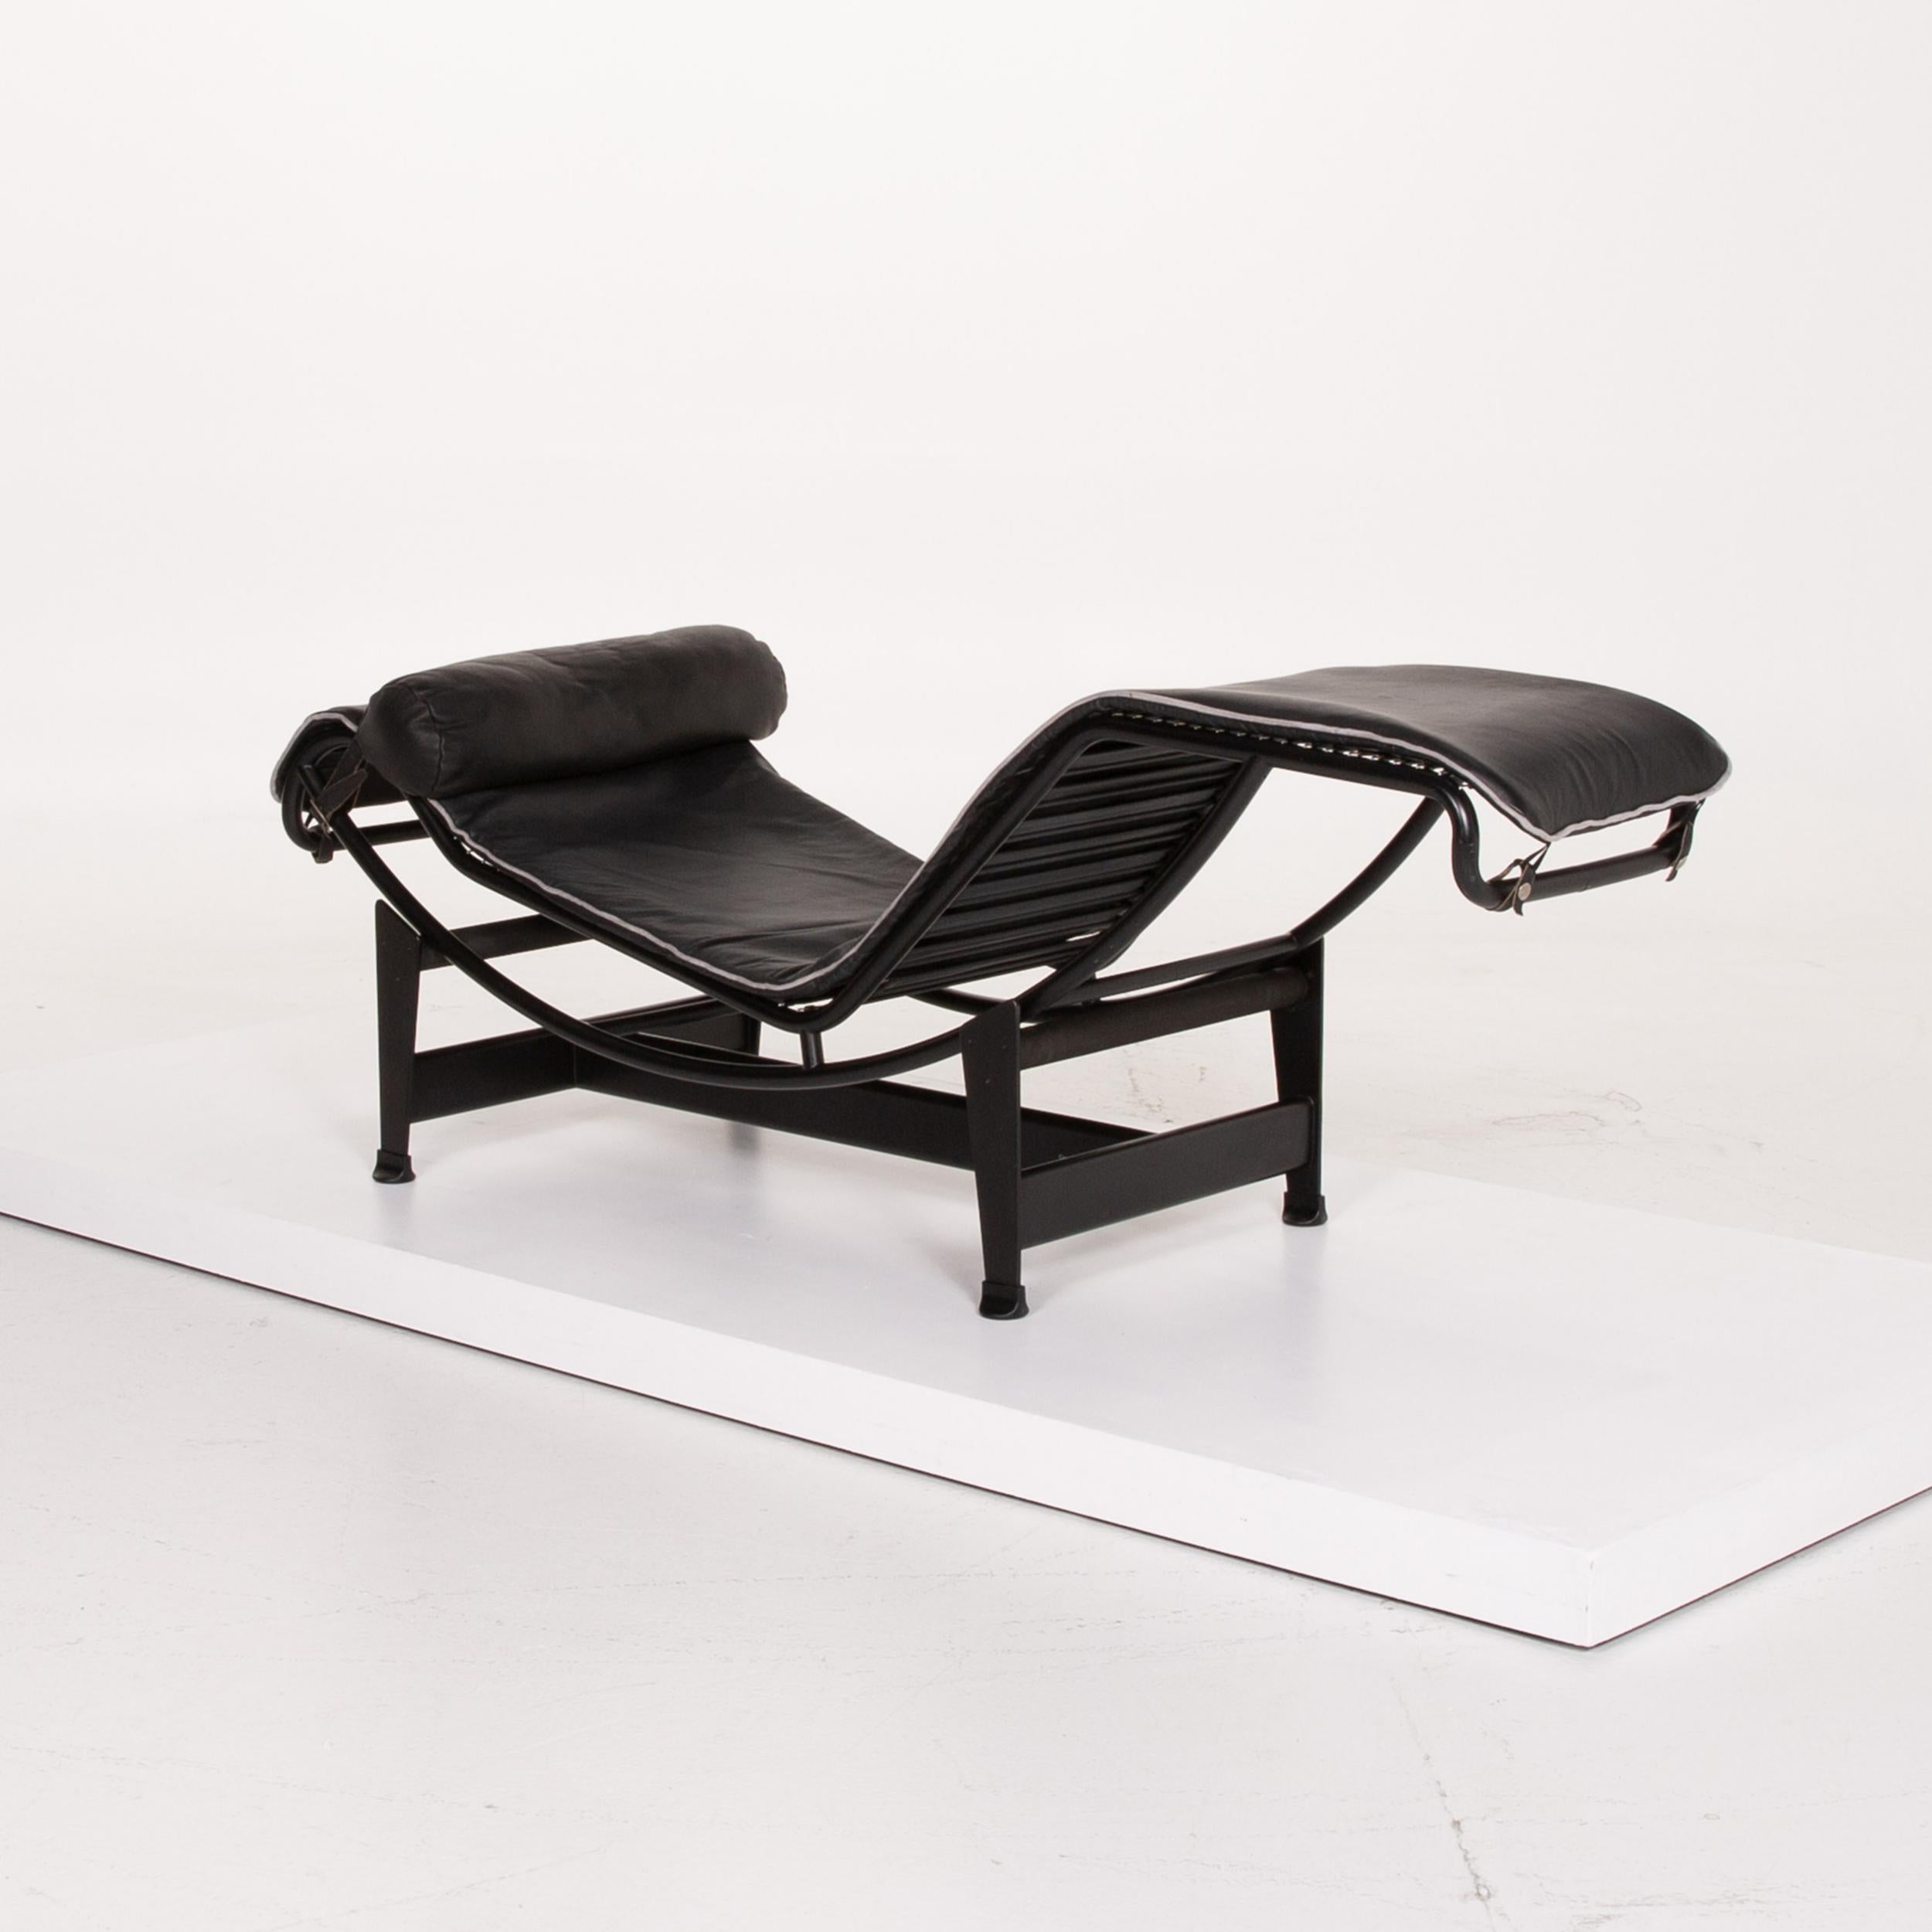 Cassina Le Corbusier LC 4 Leather Lounger Black Relaxation Function Relaxation 3